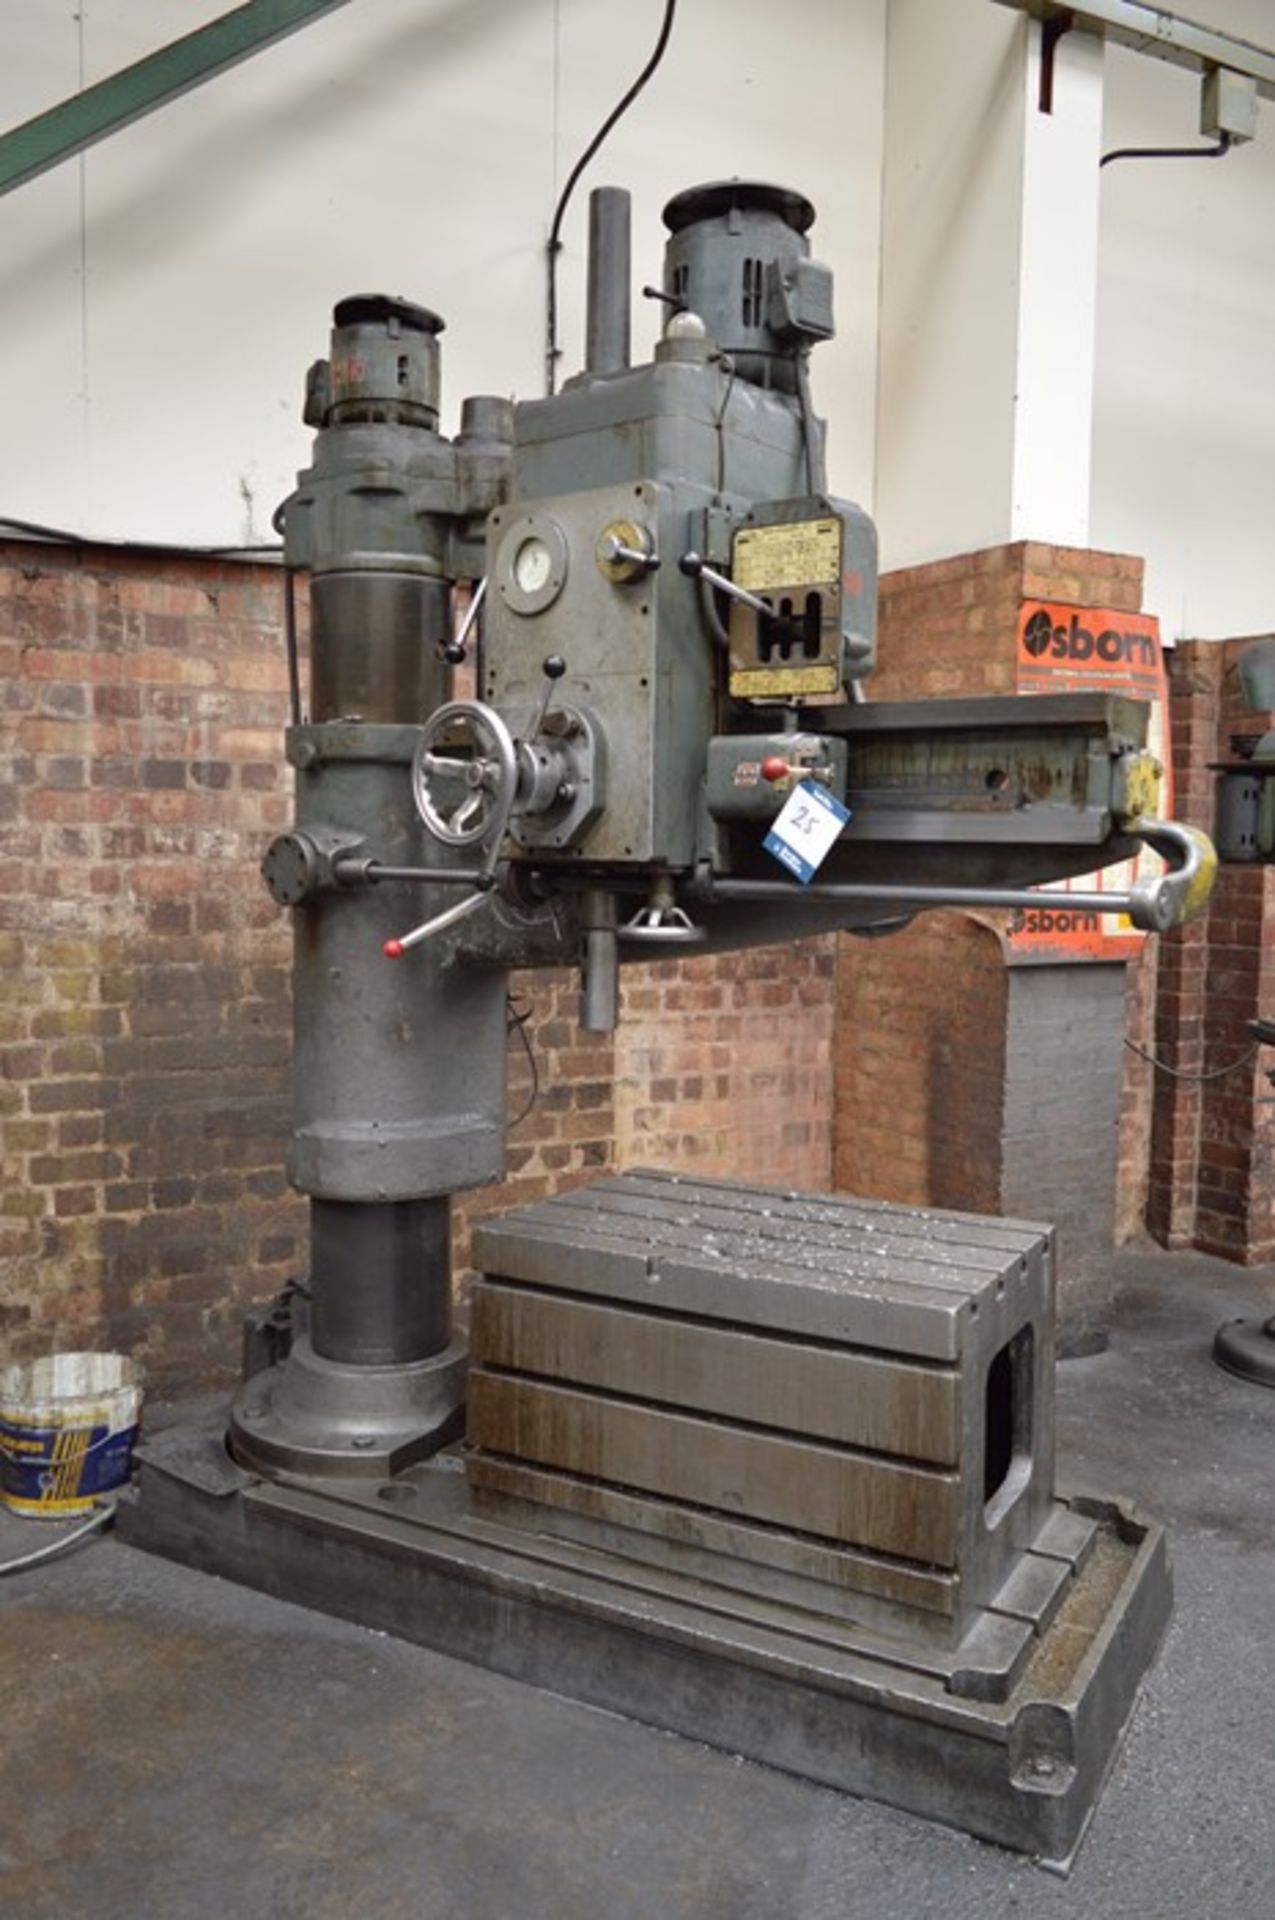 Town Woodhouse, AE4 radial arm drill, Machine No. 38998, bed size: 0.92m x 0.61m (Risk Assessment